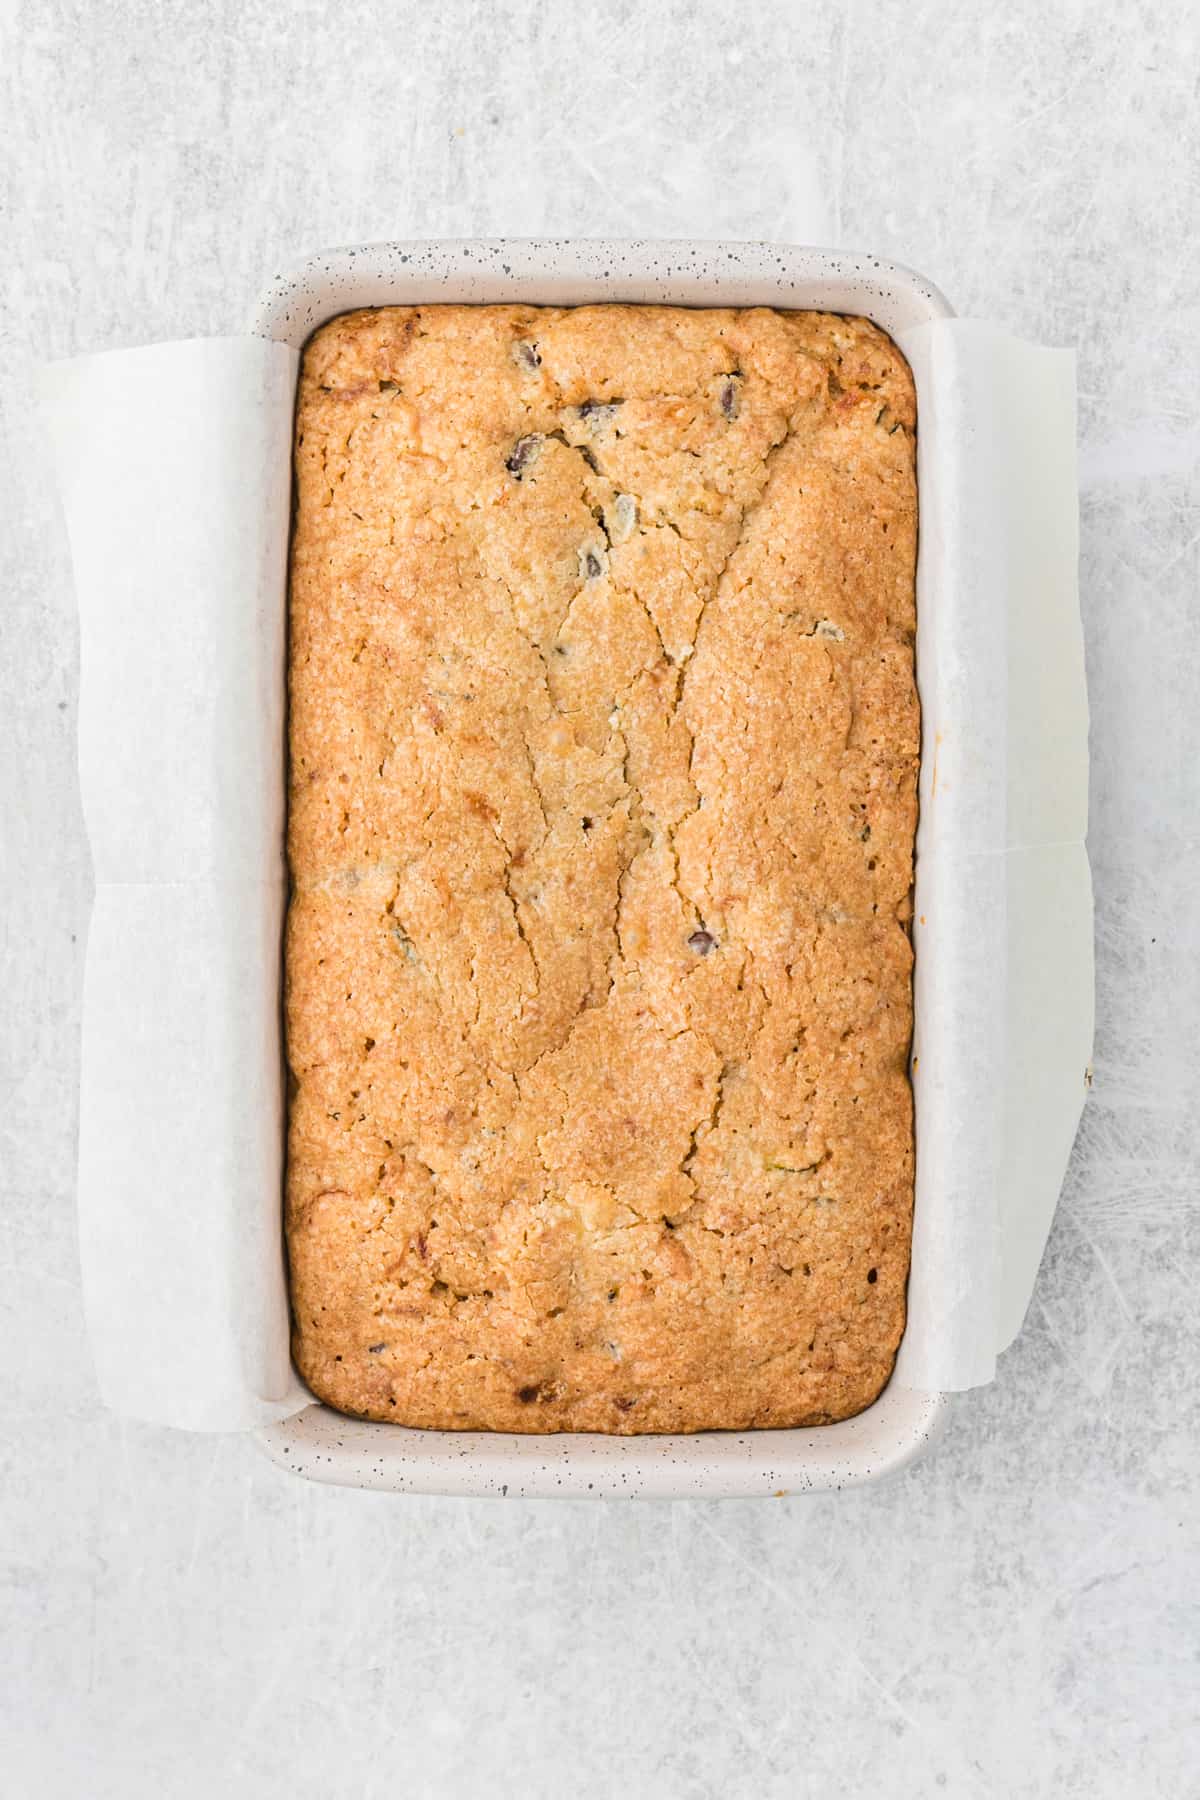 Baked loaf of chocolate chip zucchini bread in a loaf pan.